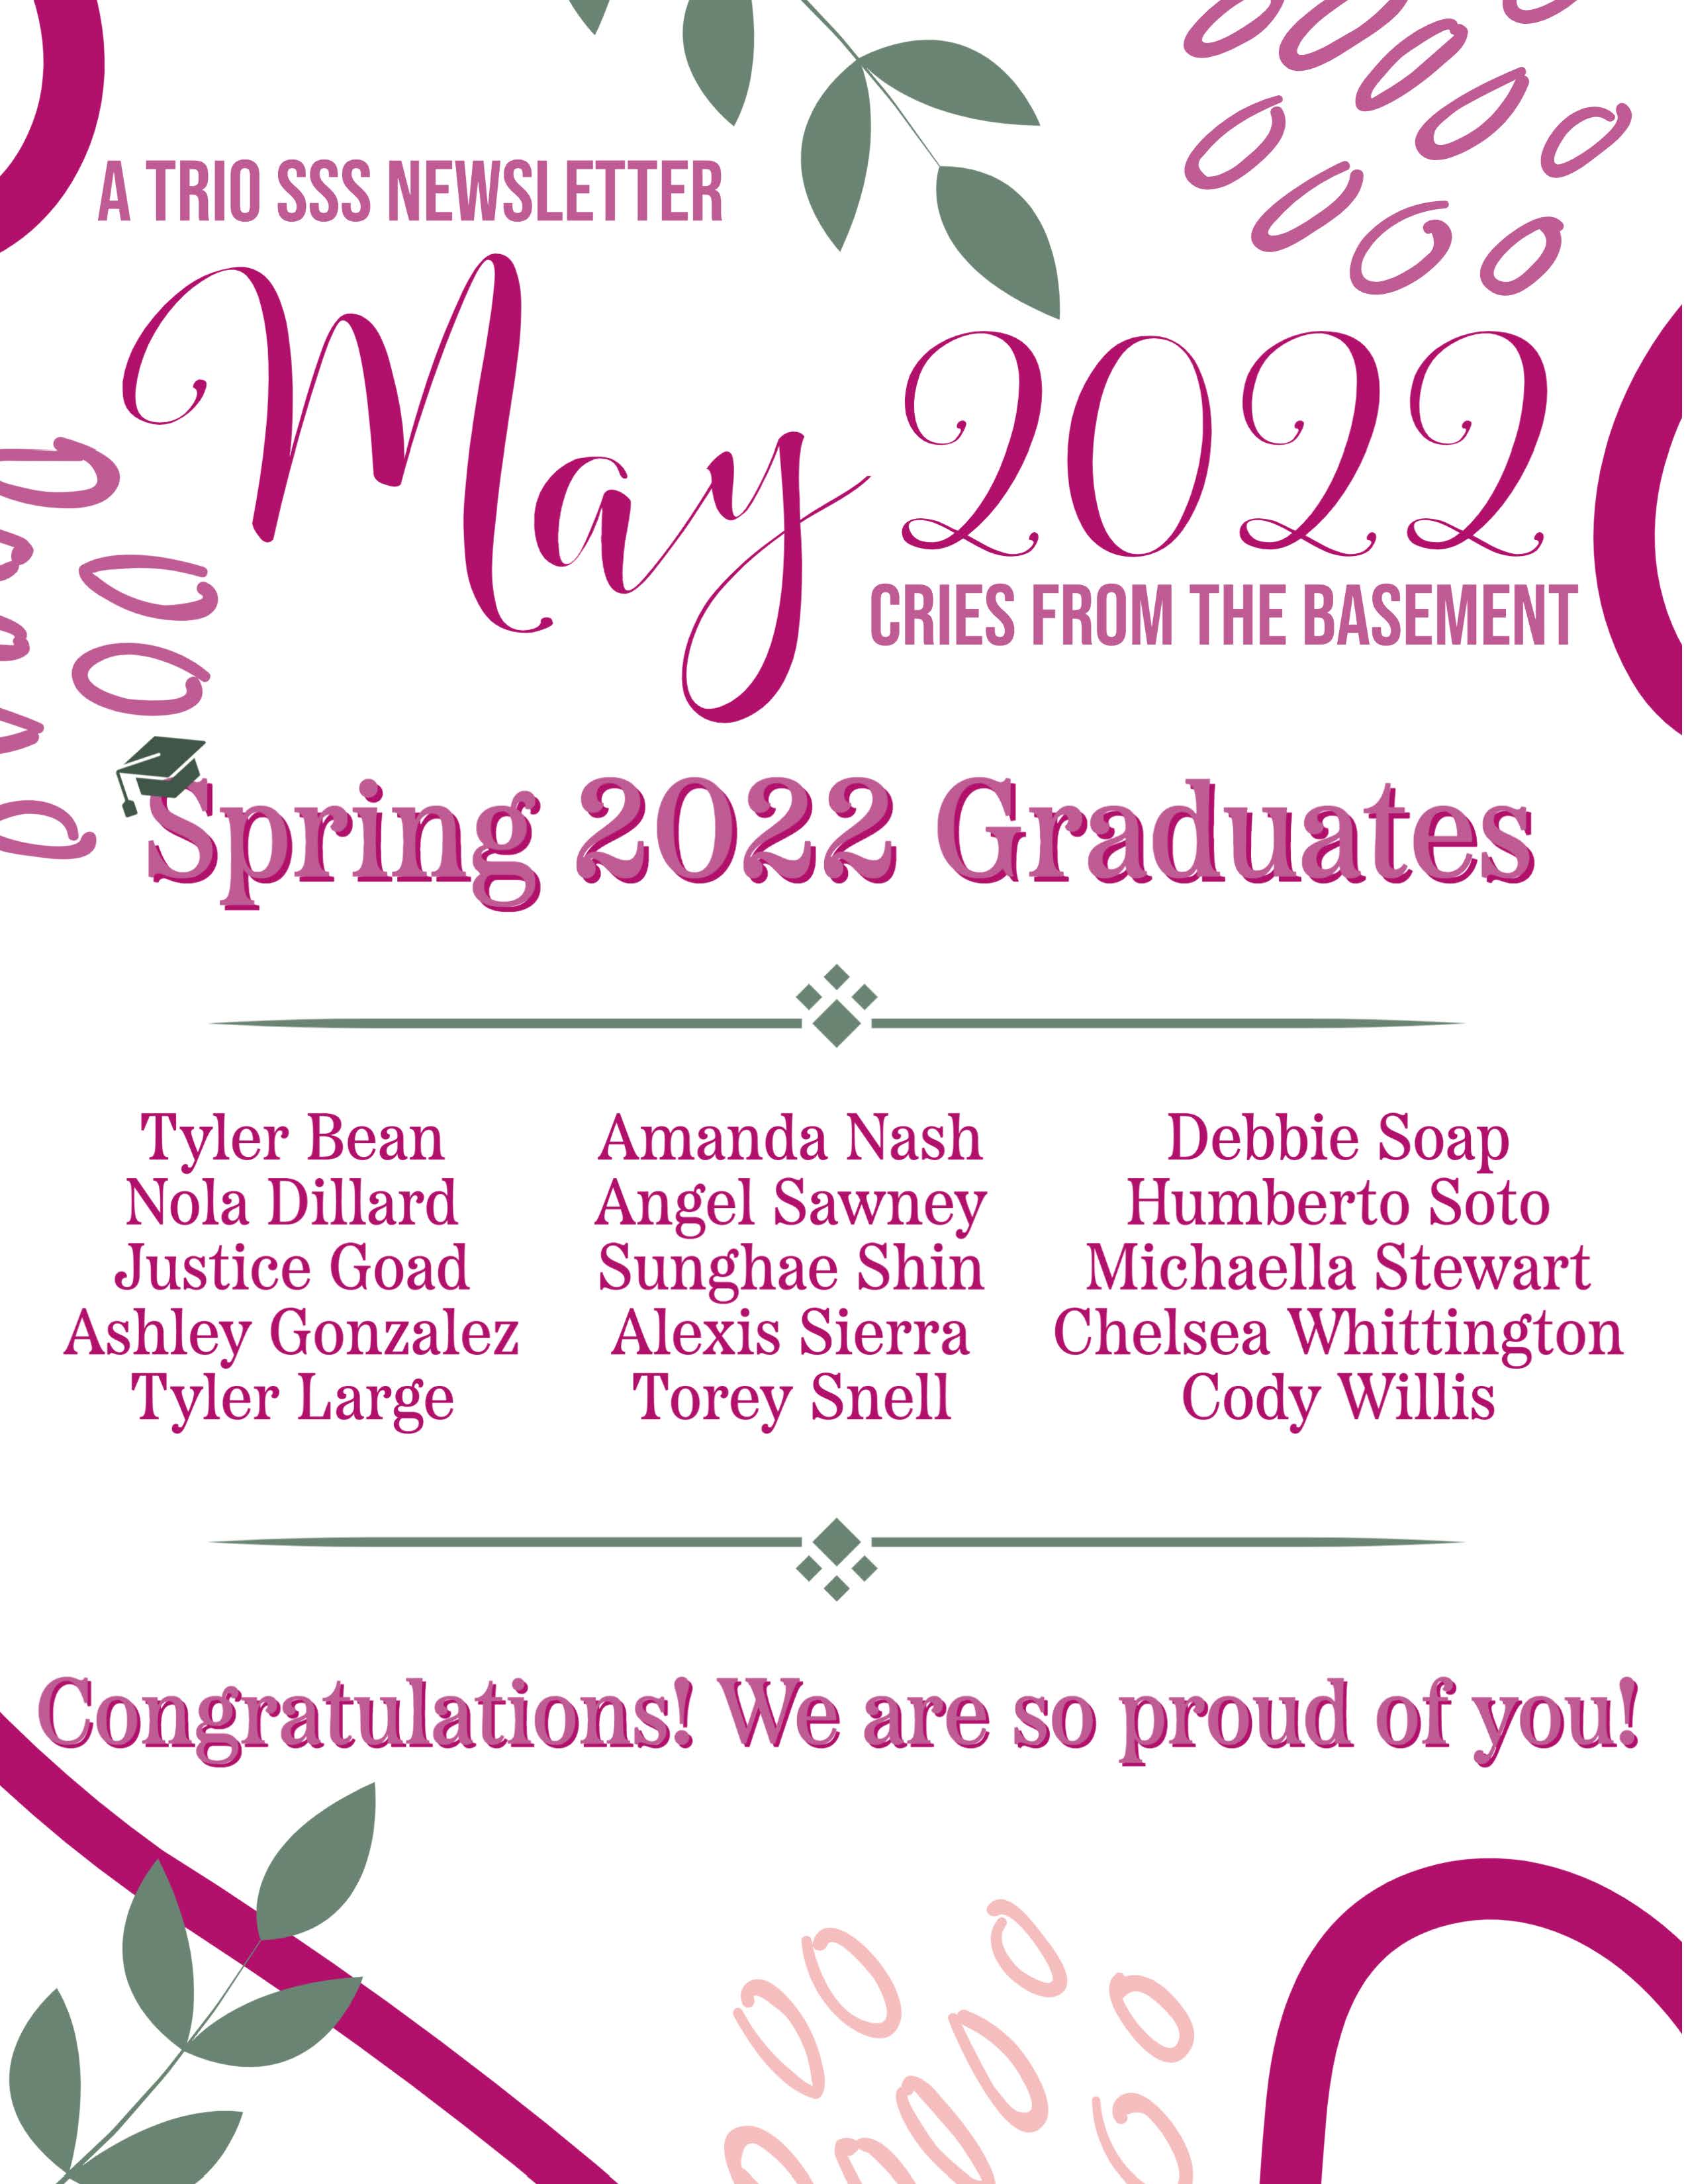 May 2022 Newsletter